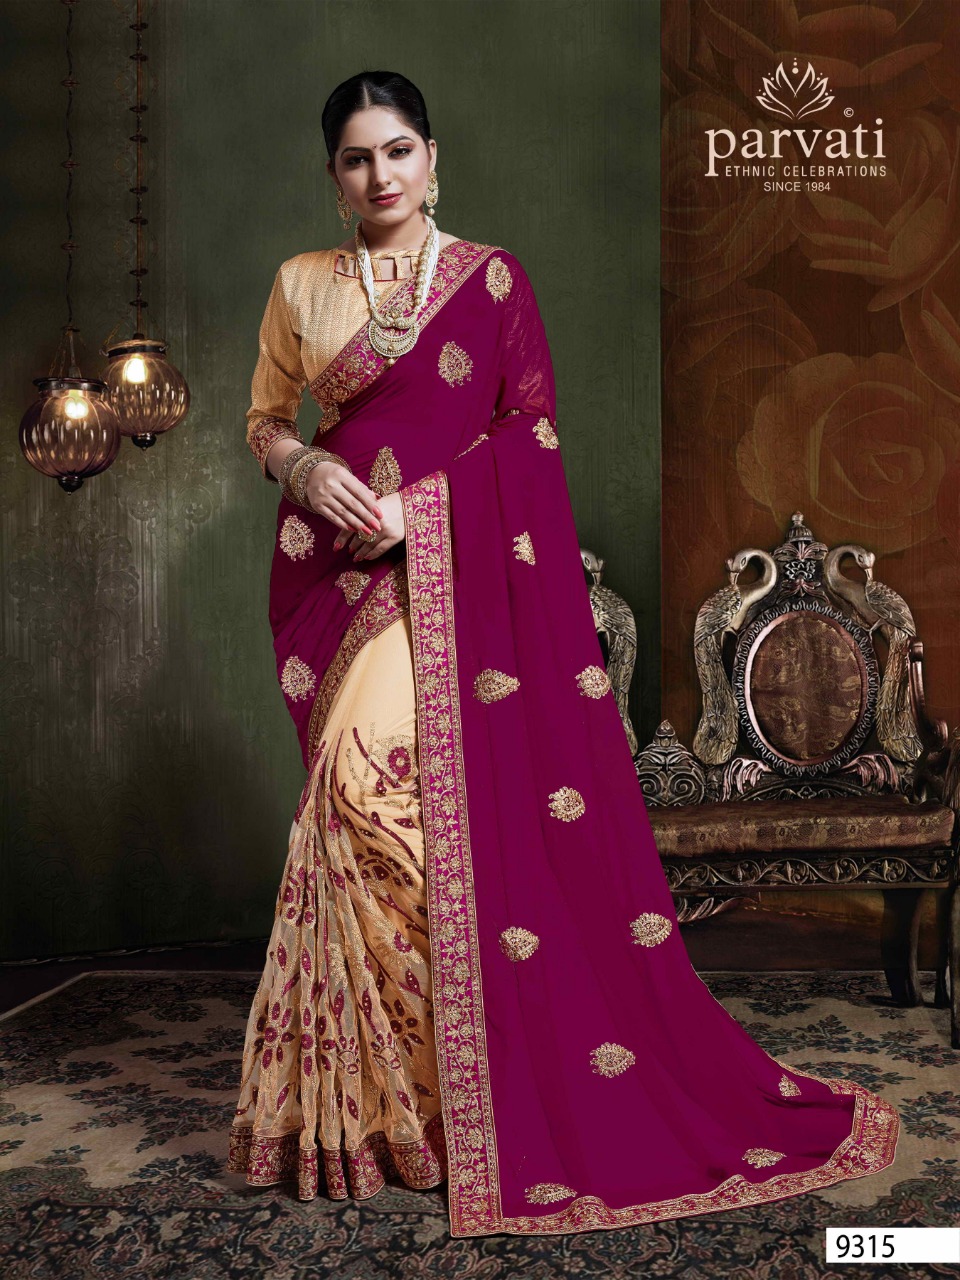 Parvati Ethnic 9306-9317 series rich collection of sarees